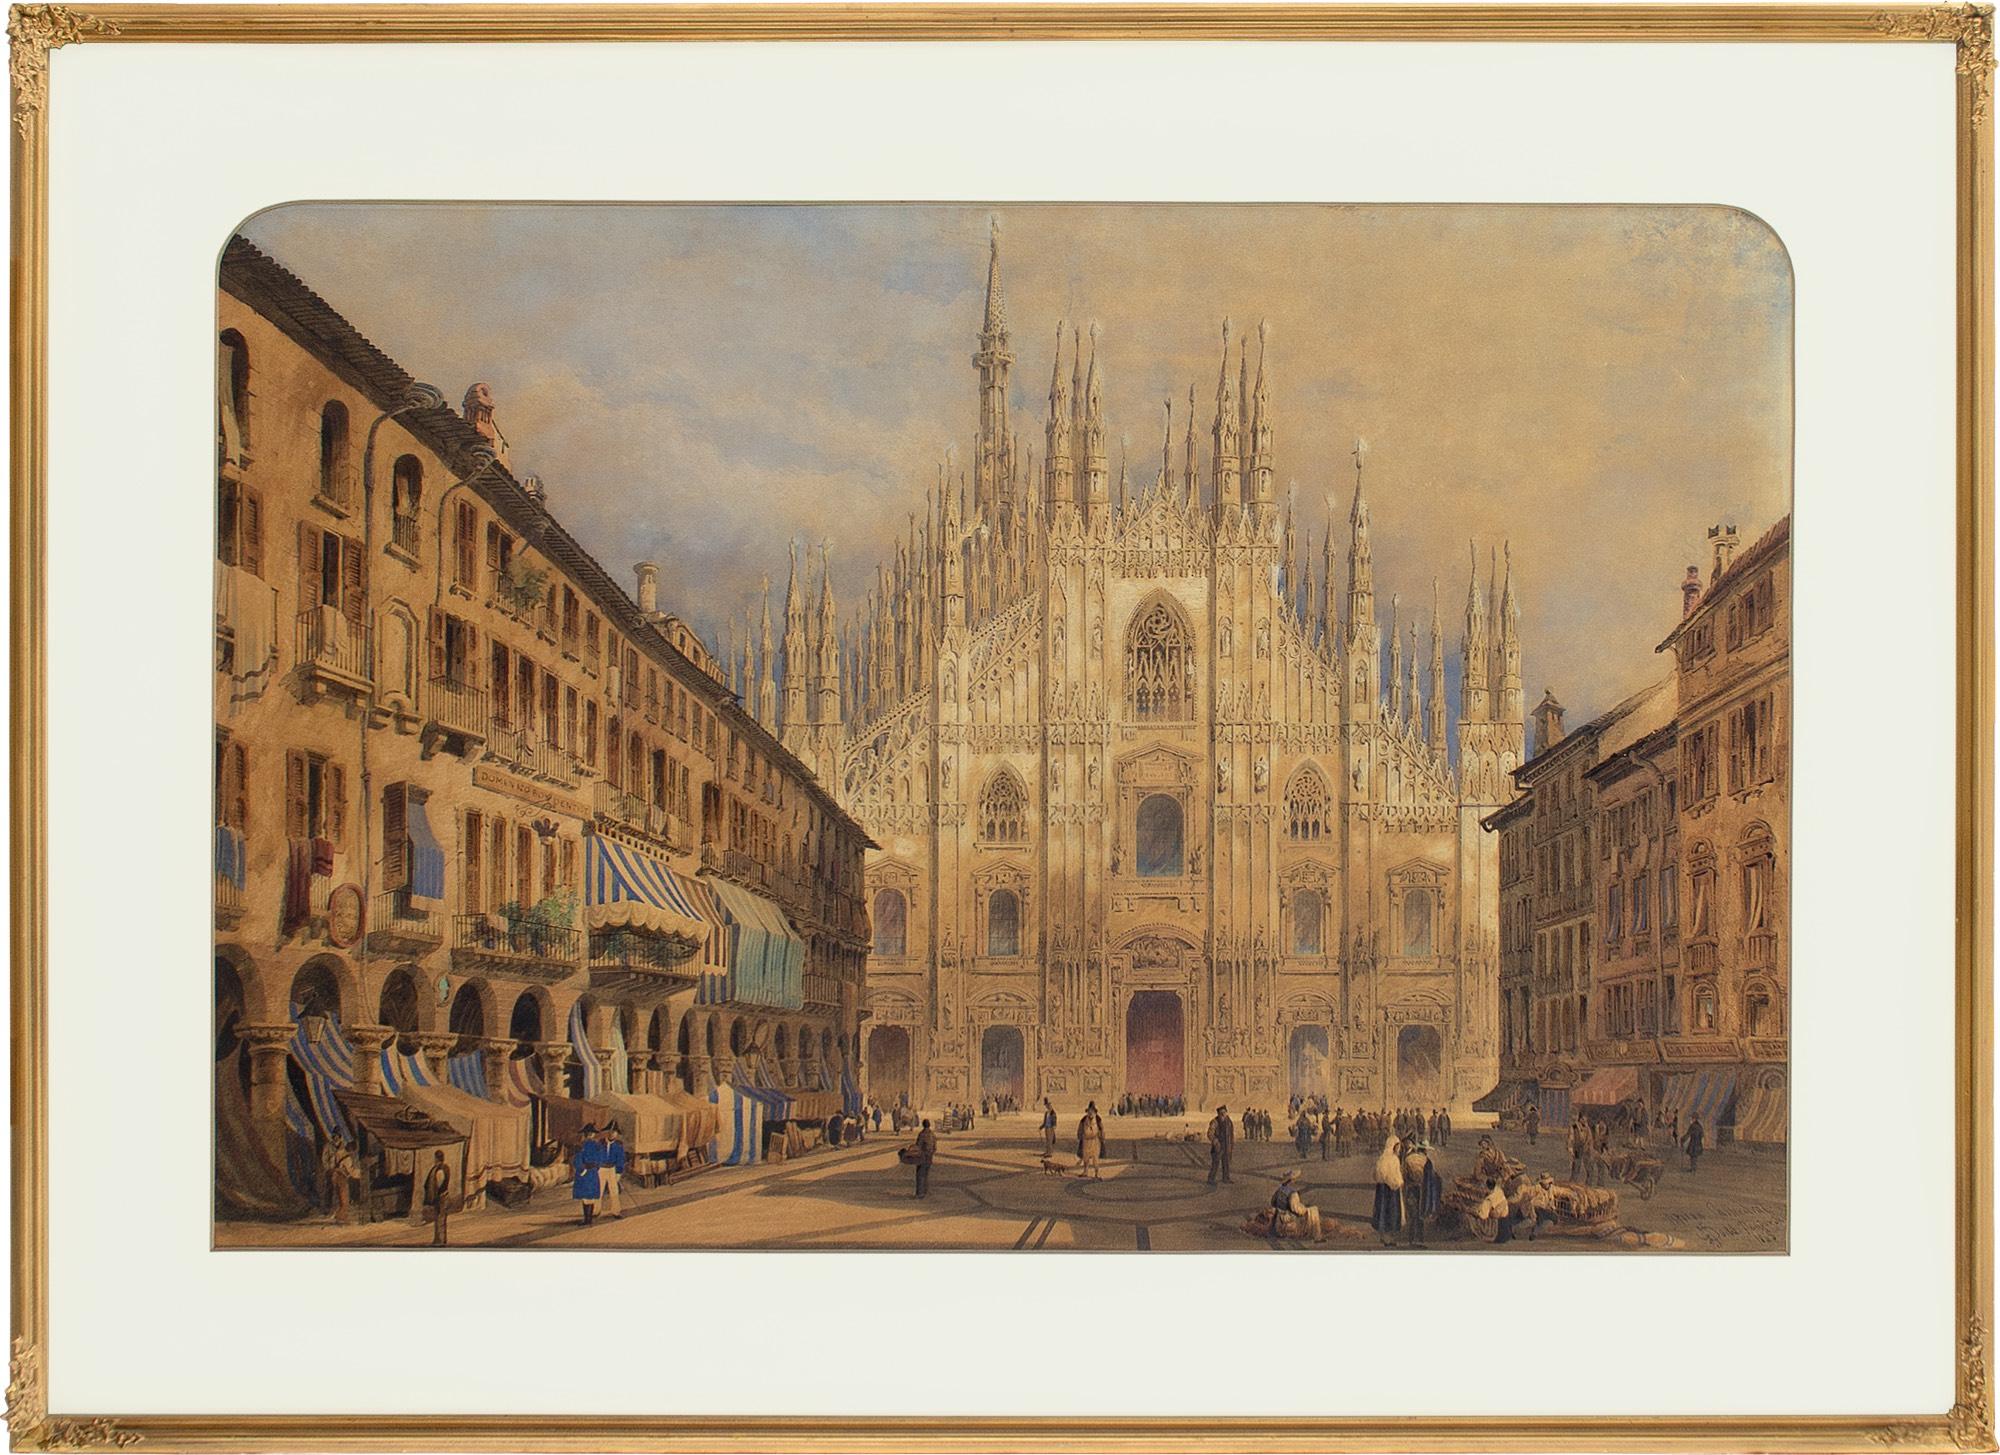 This 19th-century watercolour by British artist Joseph Josiah Dodd (1809-1880) depicts Milan Cathedral in Italy.

Rising like a Gothic behemoth, the majestic facade of Milan Cathedral. From our view on the Piazza del Duomo, quaint shop fronts are